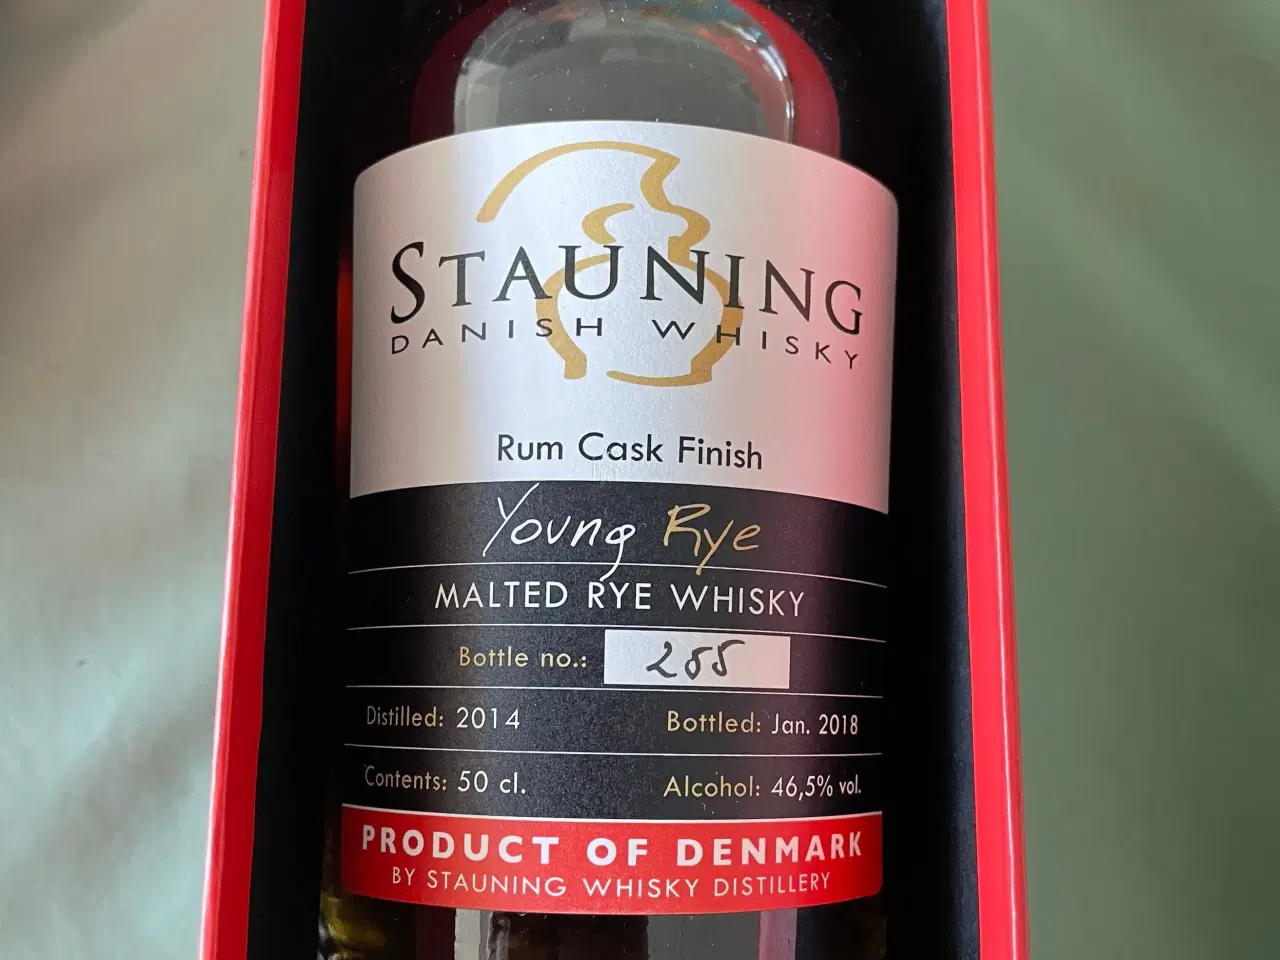 Billede 2 - Stauning whisky Rum Cask Finish Young Rey